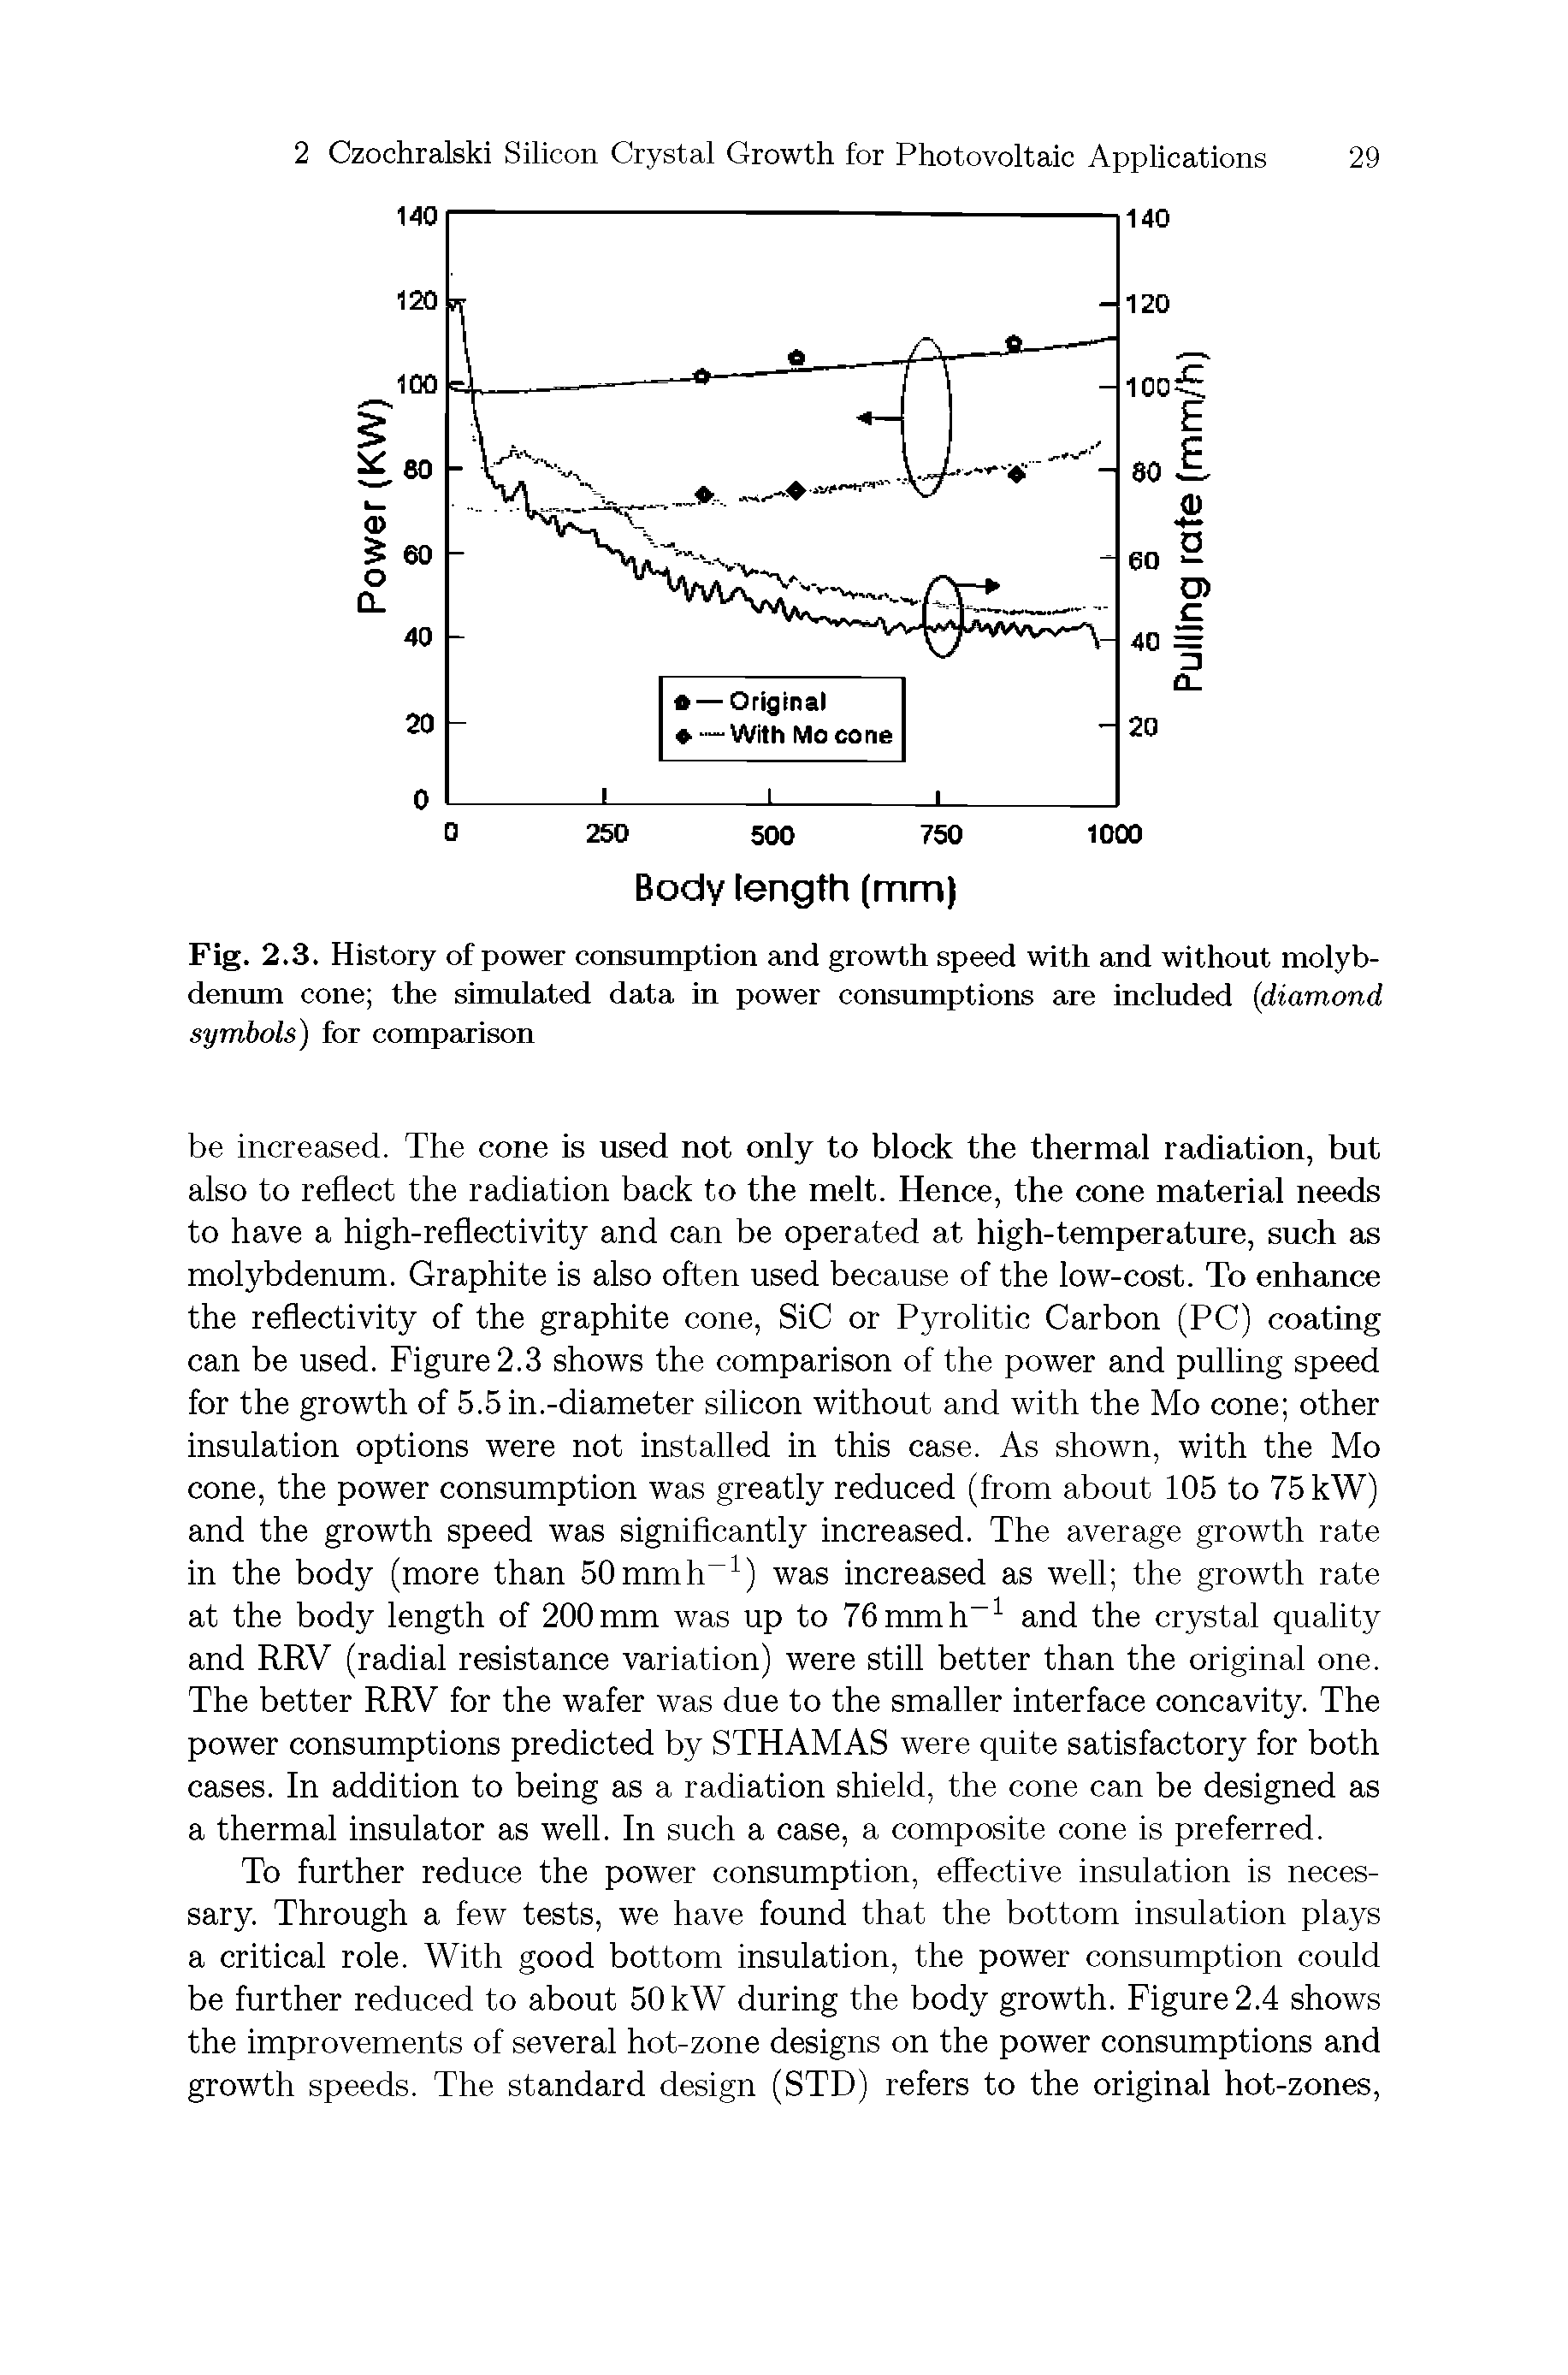 Fig. 2.3. History of power consumption and growth speed with and without molybdenum cone the simulated data in power consumptions are included (diamond symbols) for comparison...